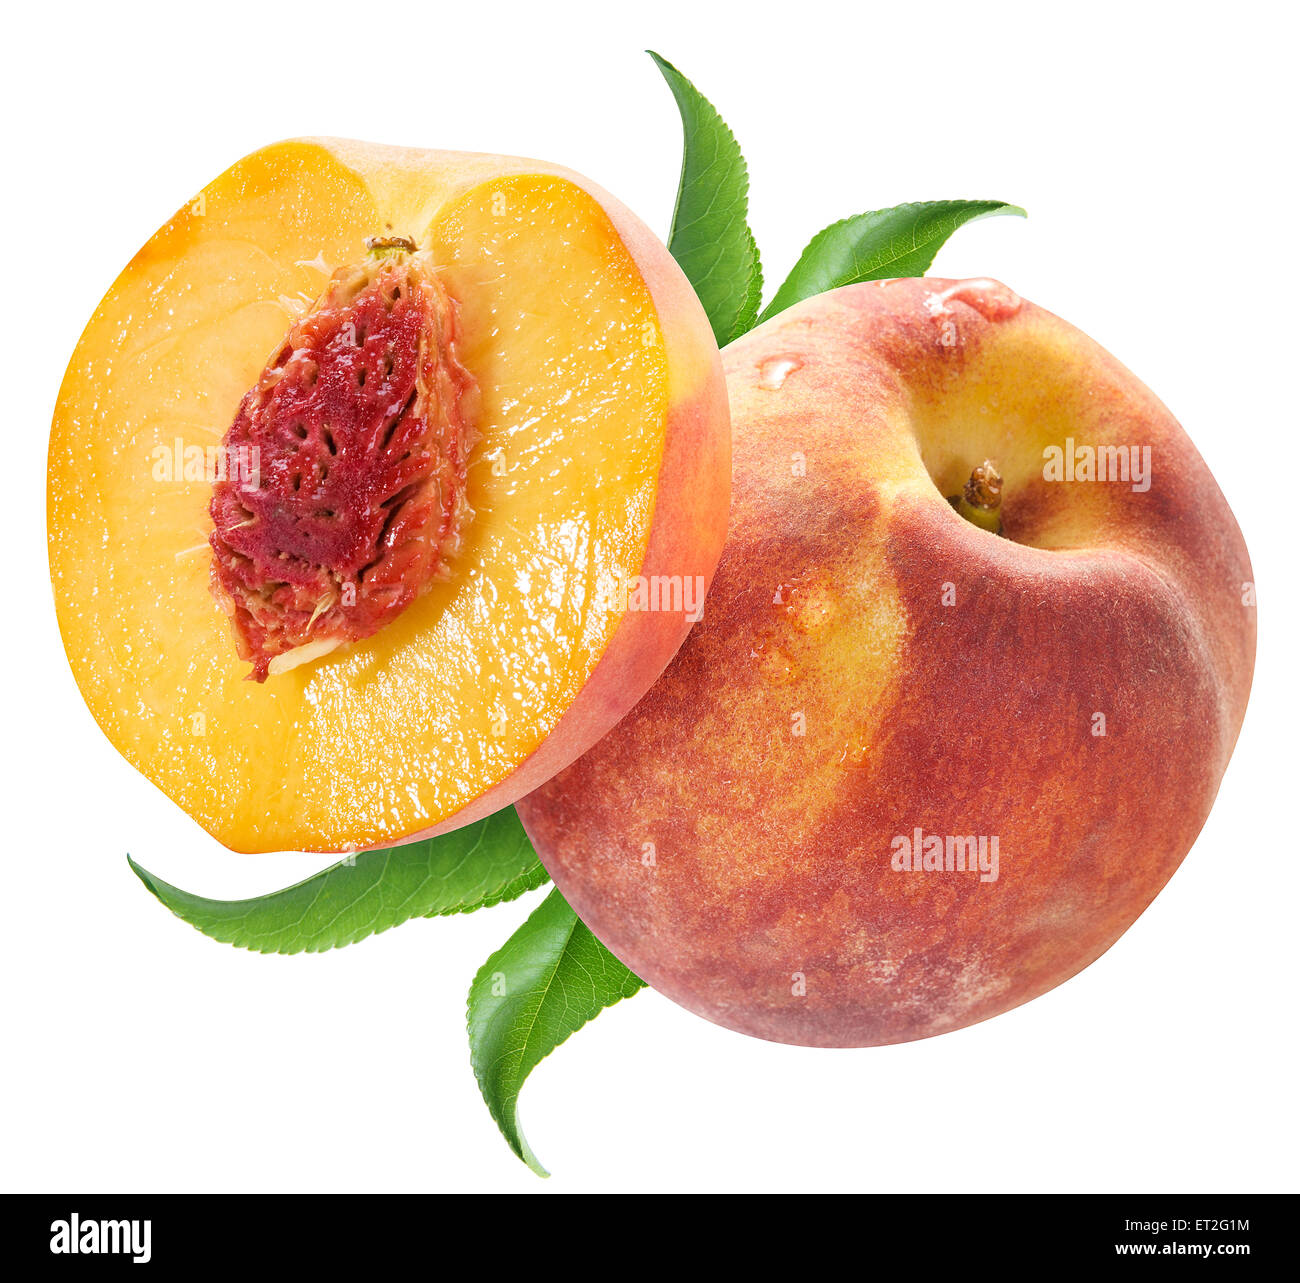 Ripe peach fruit. File contains clipping paths. Stock Photo